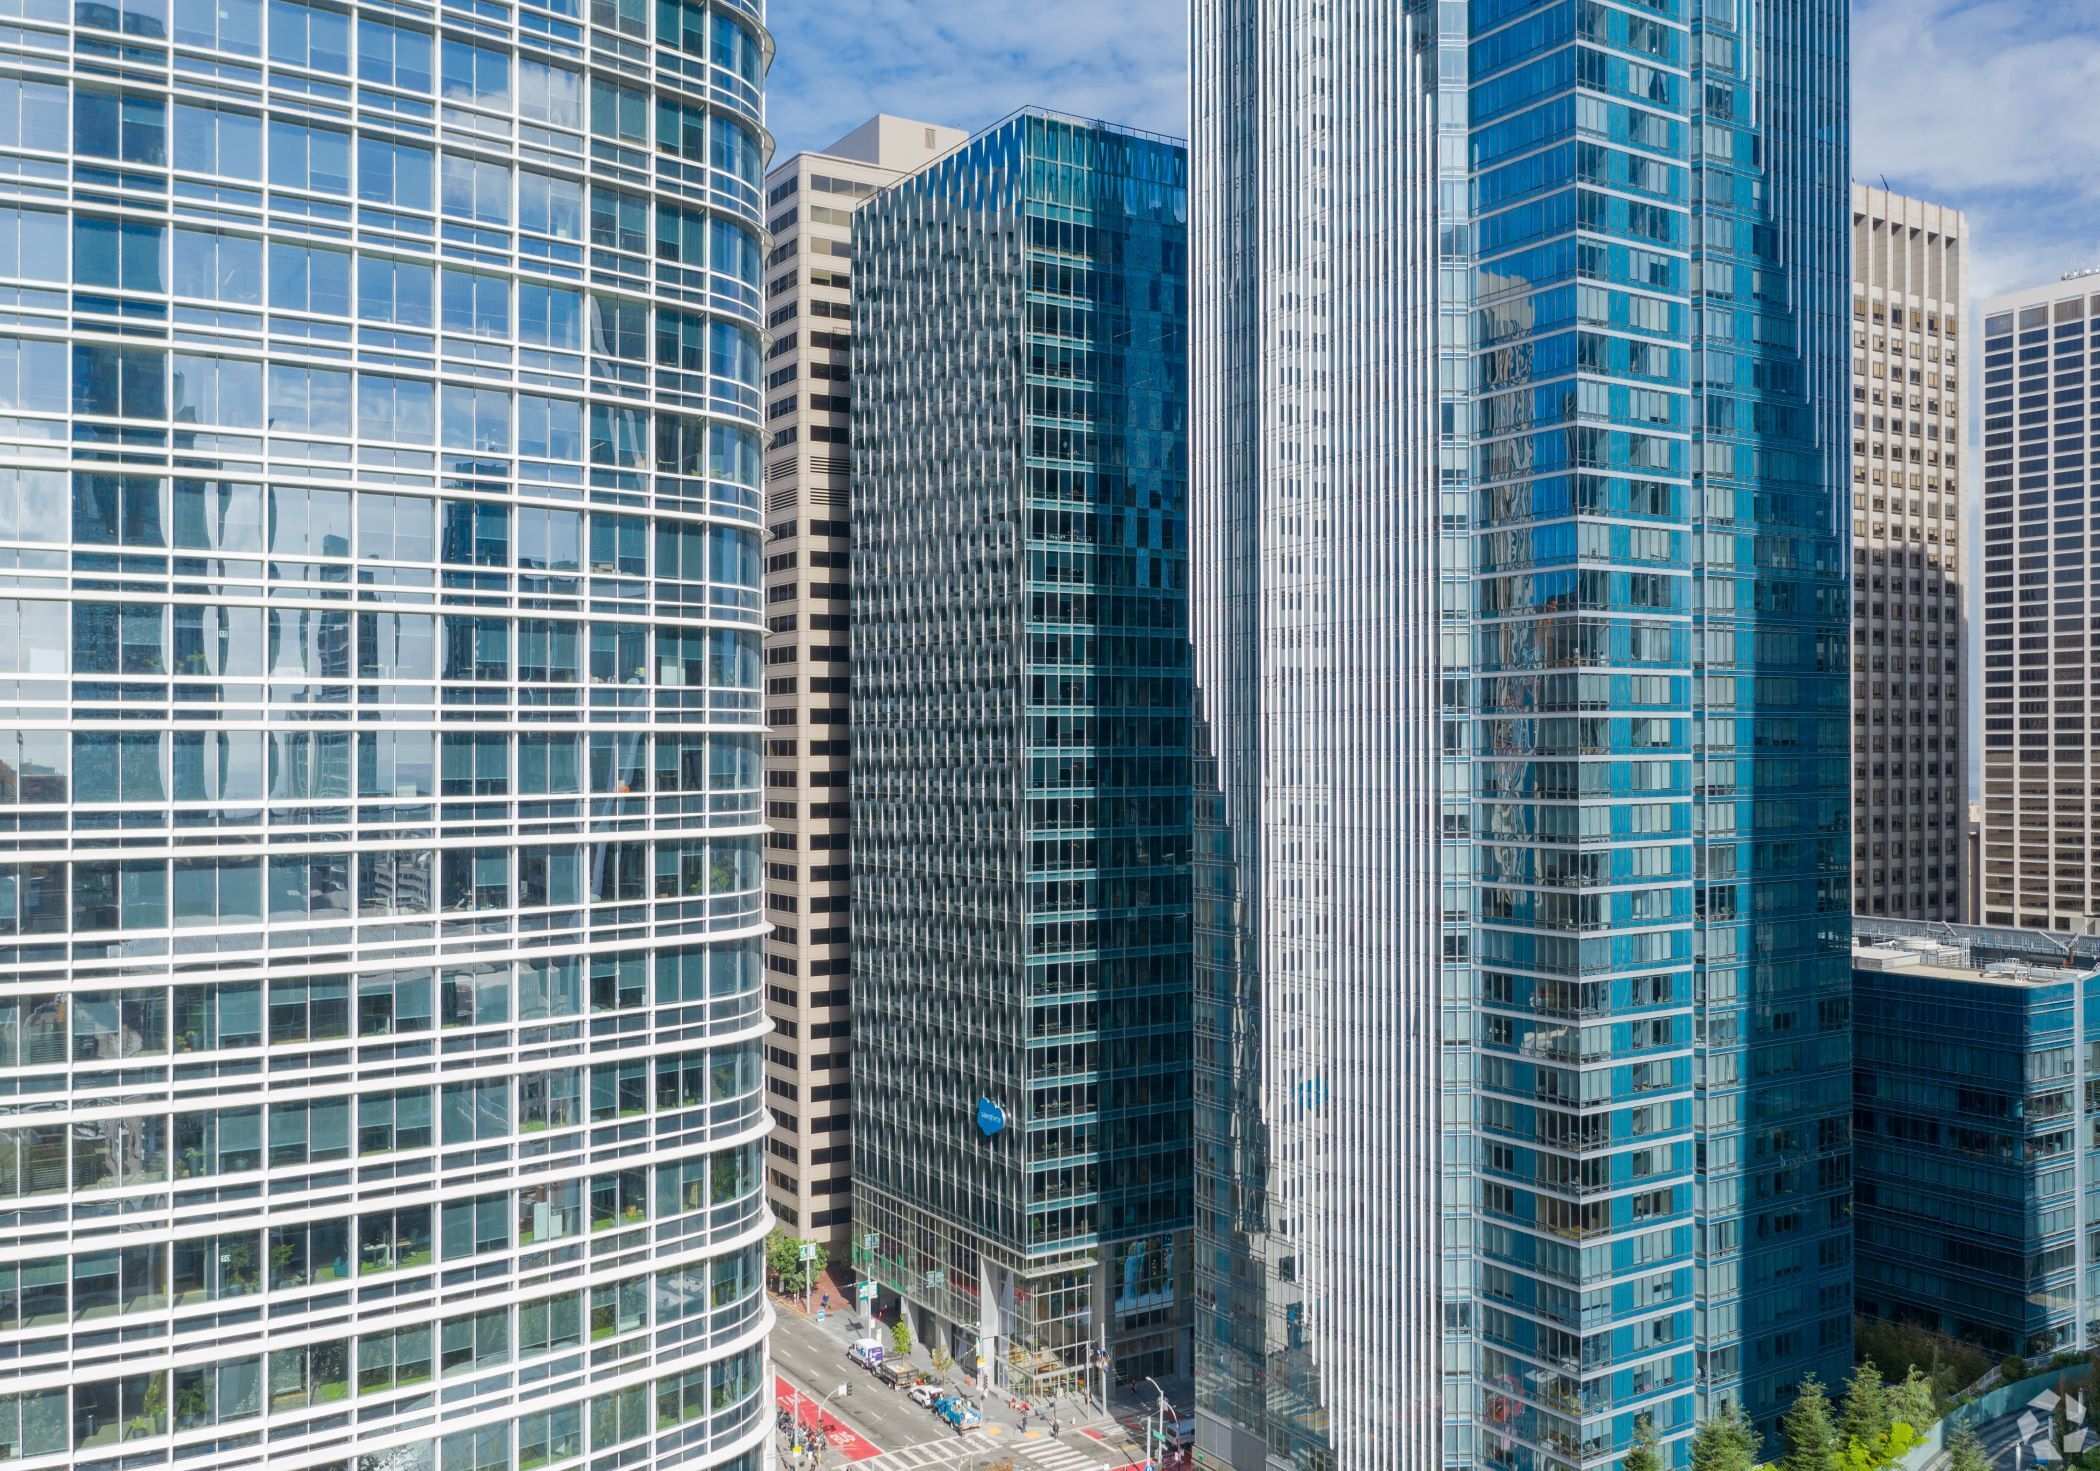 Salesforce has listed the remainder of its space at 350 Mission St. for sublease as it makes deep cuts to its real estate portfolio. (Clinton Perry/CoStar)